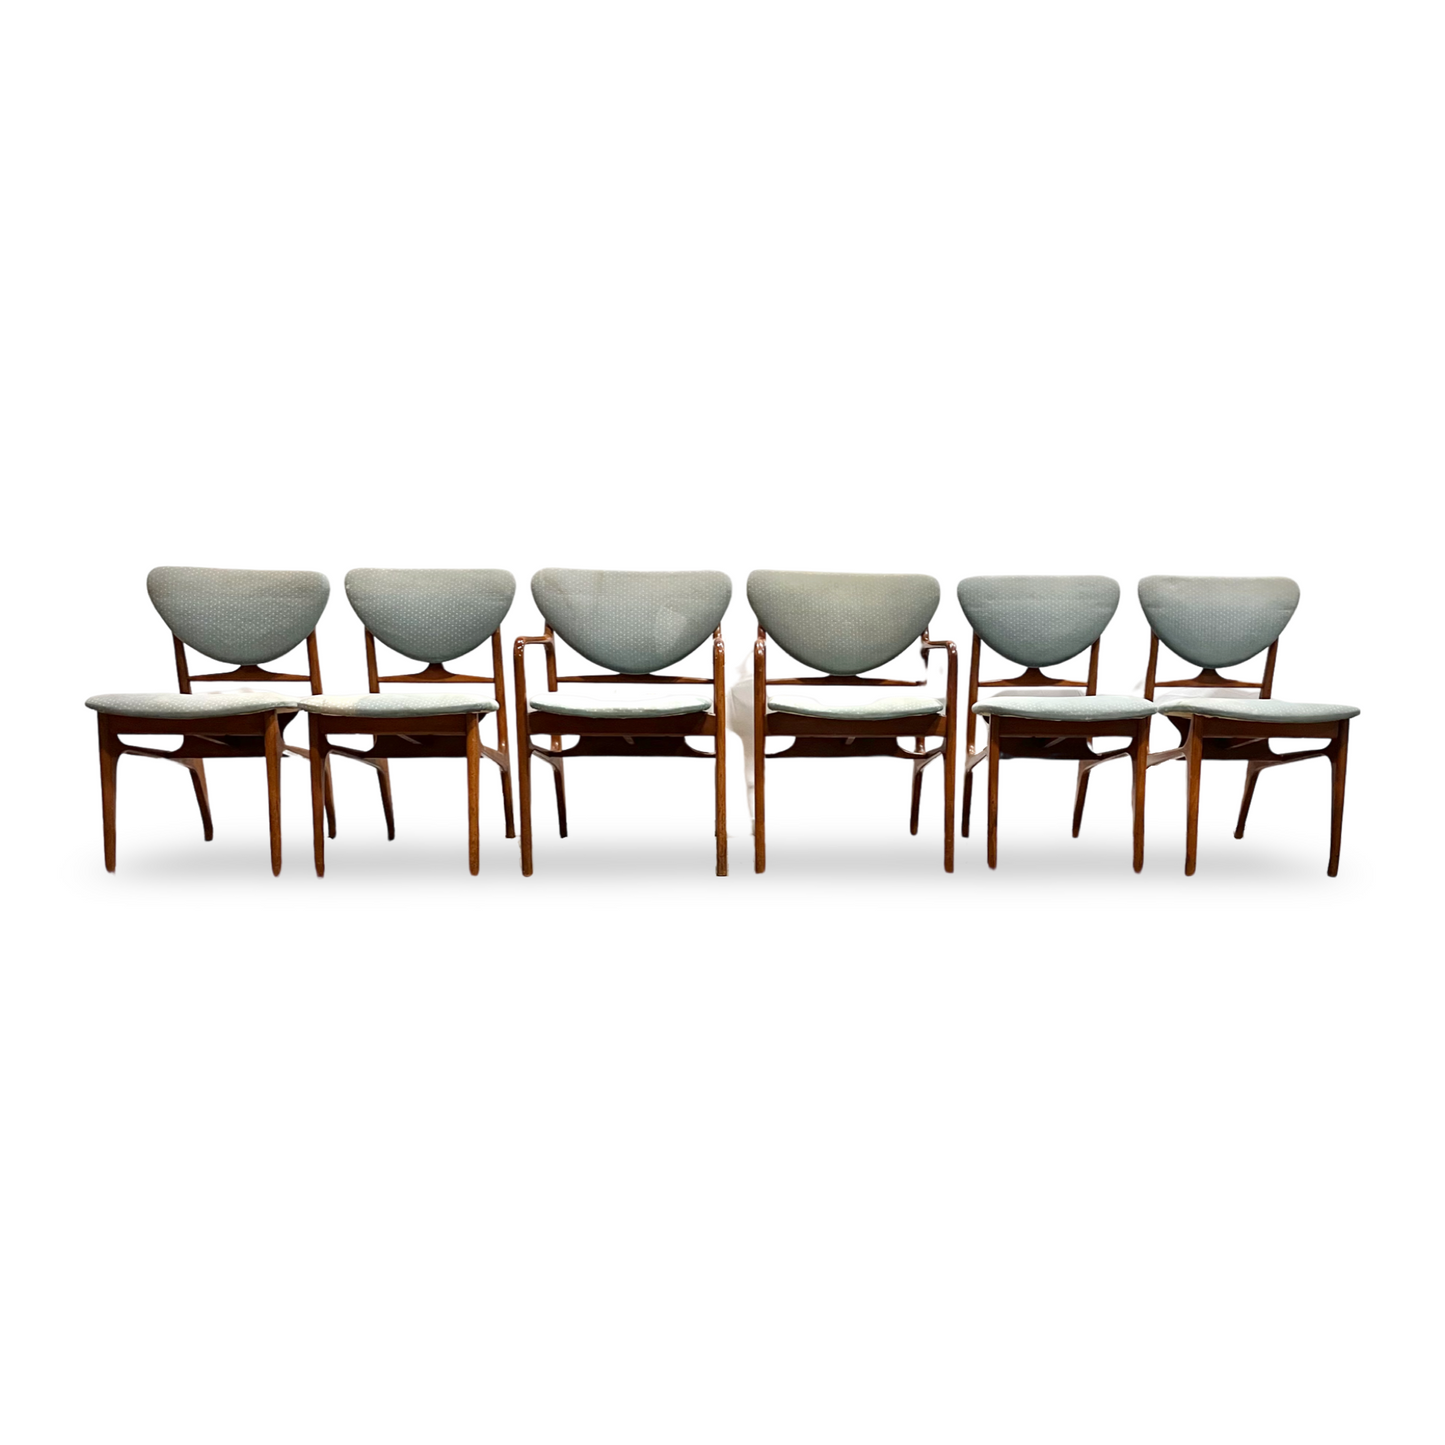 Specialty Woodcraft Vintage Danish Mid Century Modern Set of 6 Dining Chairs c. 1960s